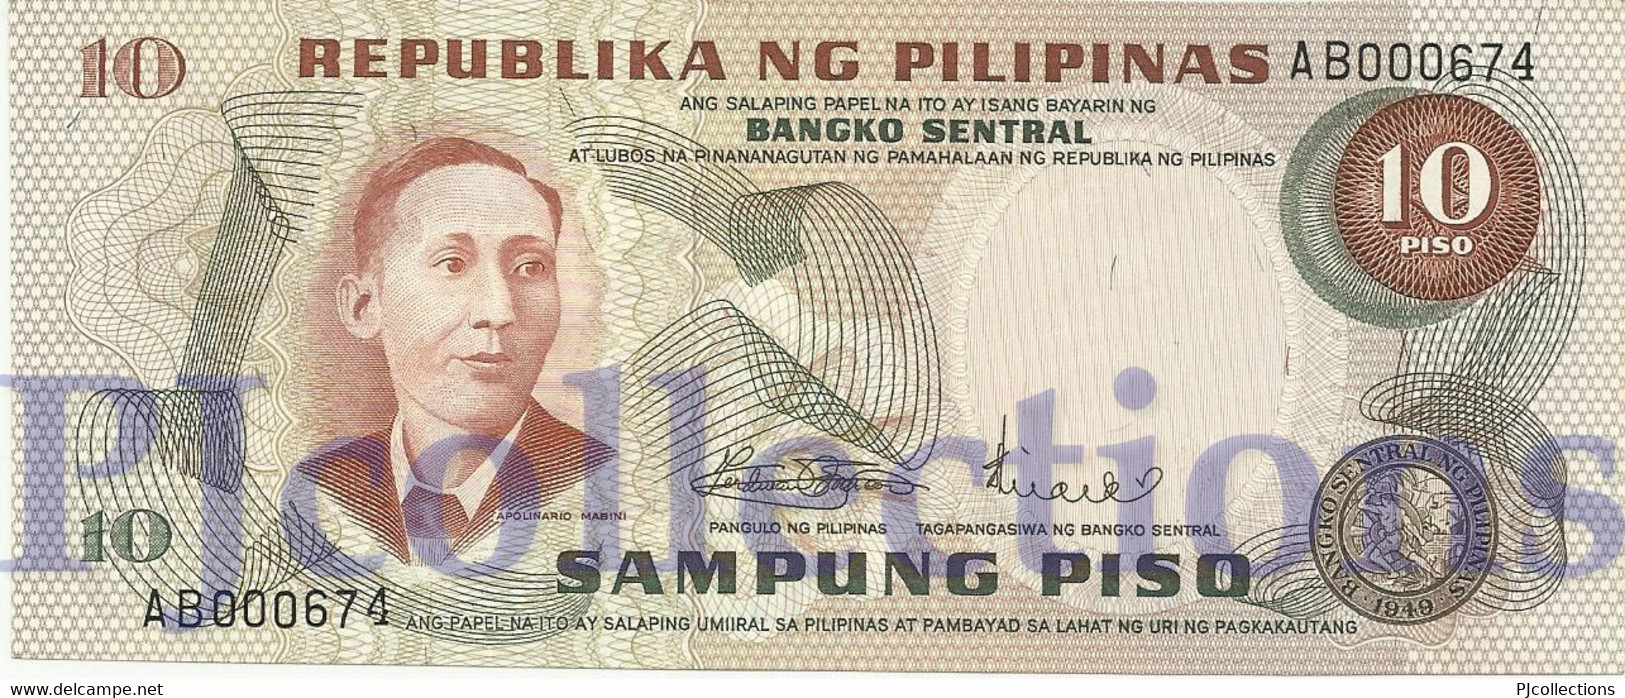 PHILIPPINES 10 PISO 1970 PICK 149a UNC LOW SERIAL NUMBER "AB000***" - Philippines